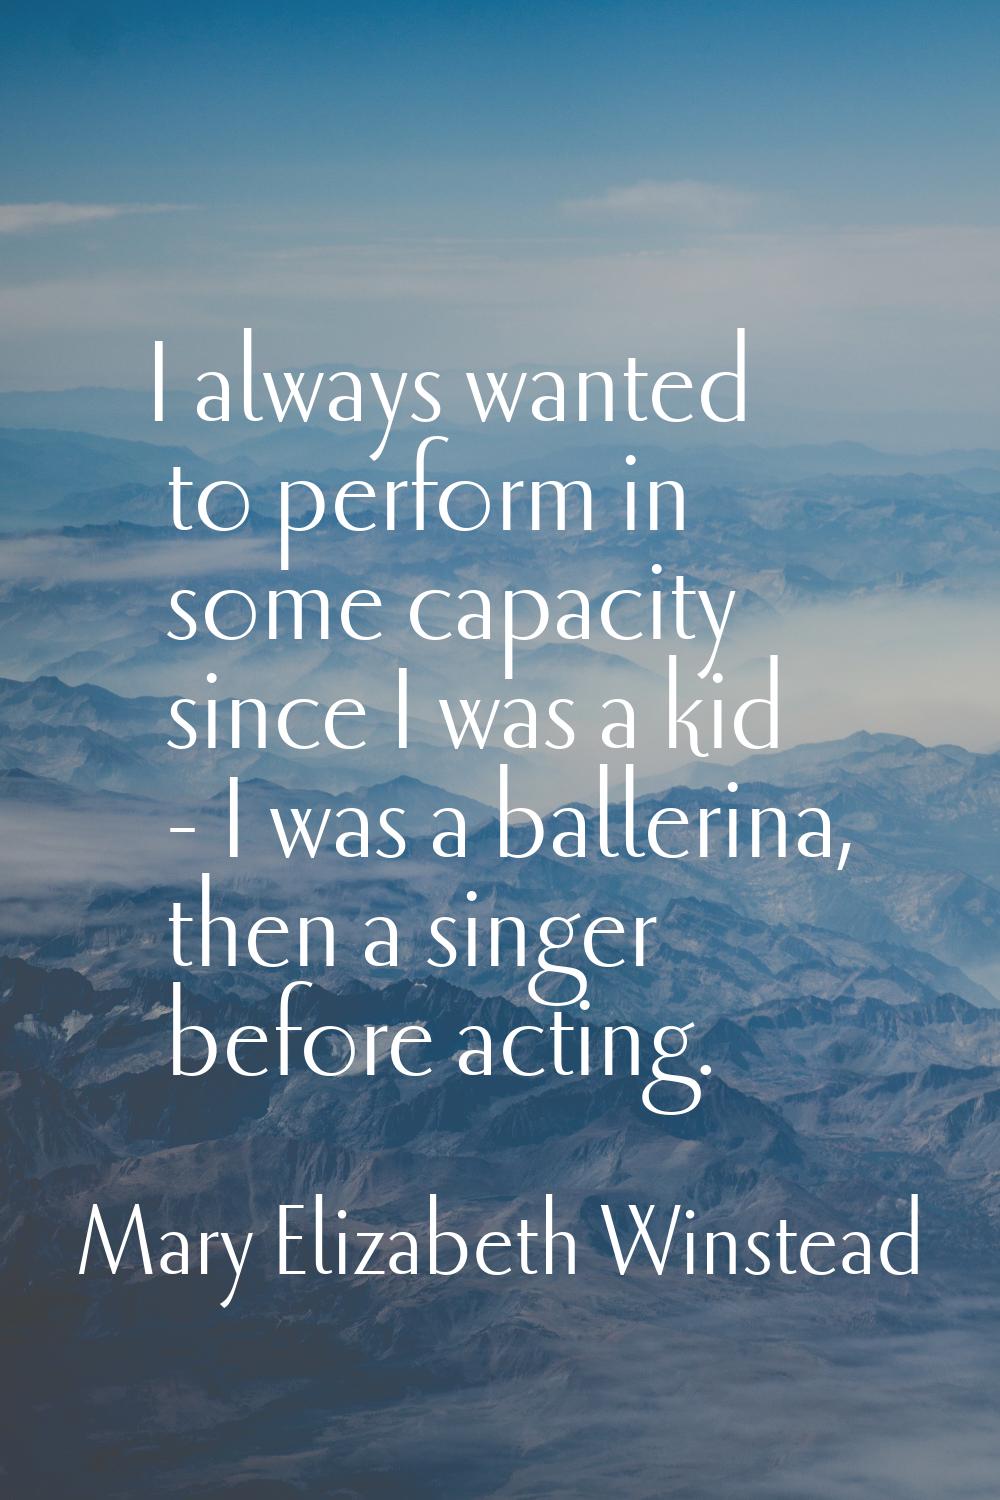 I always wanted to perform in some capacity since I was a kid - I was a ballerina, then a singer be